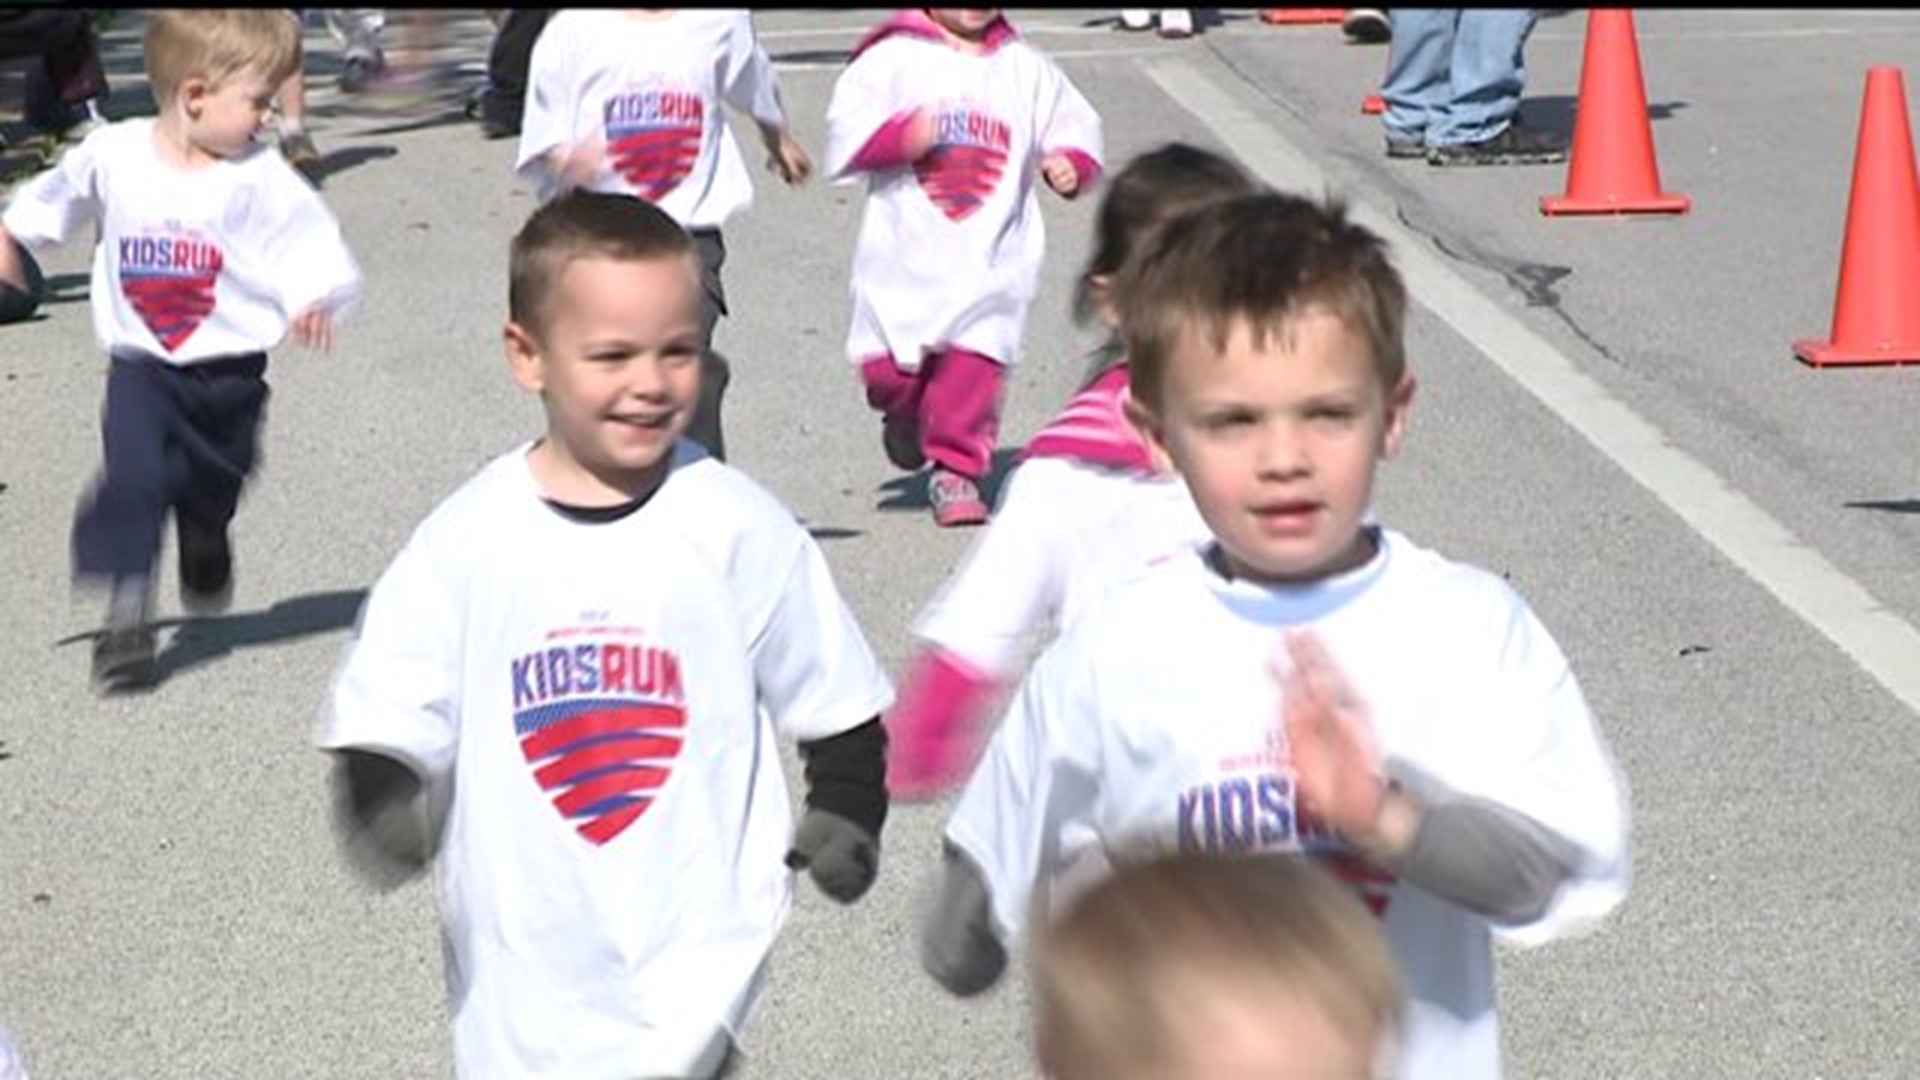 Kids run honors Armed Forces Day